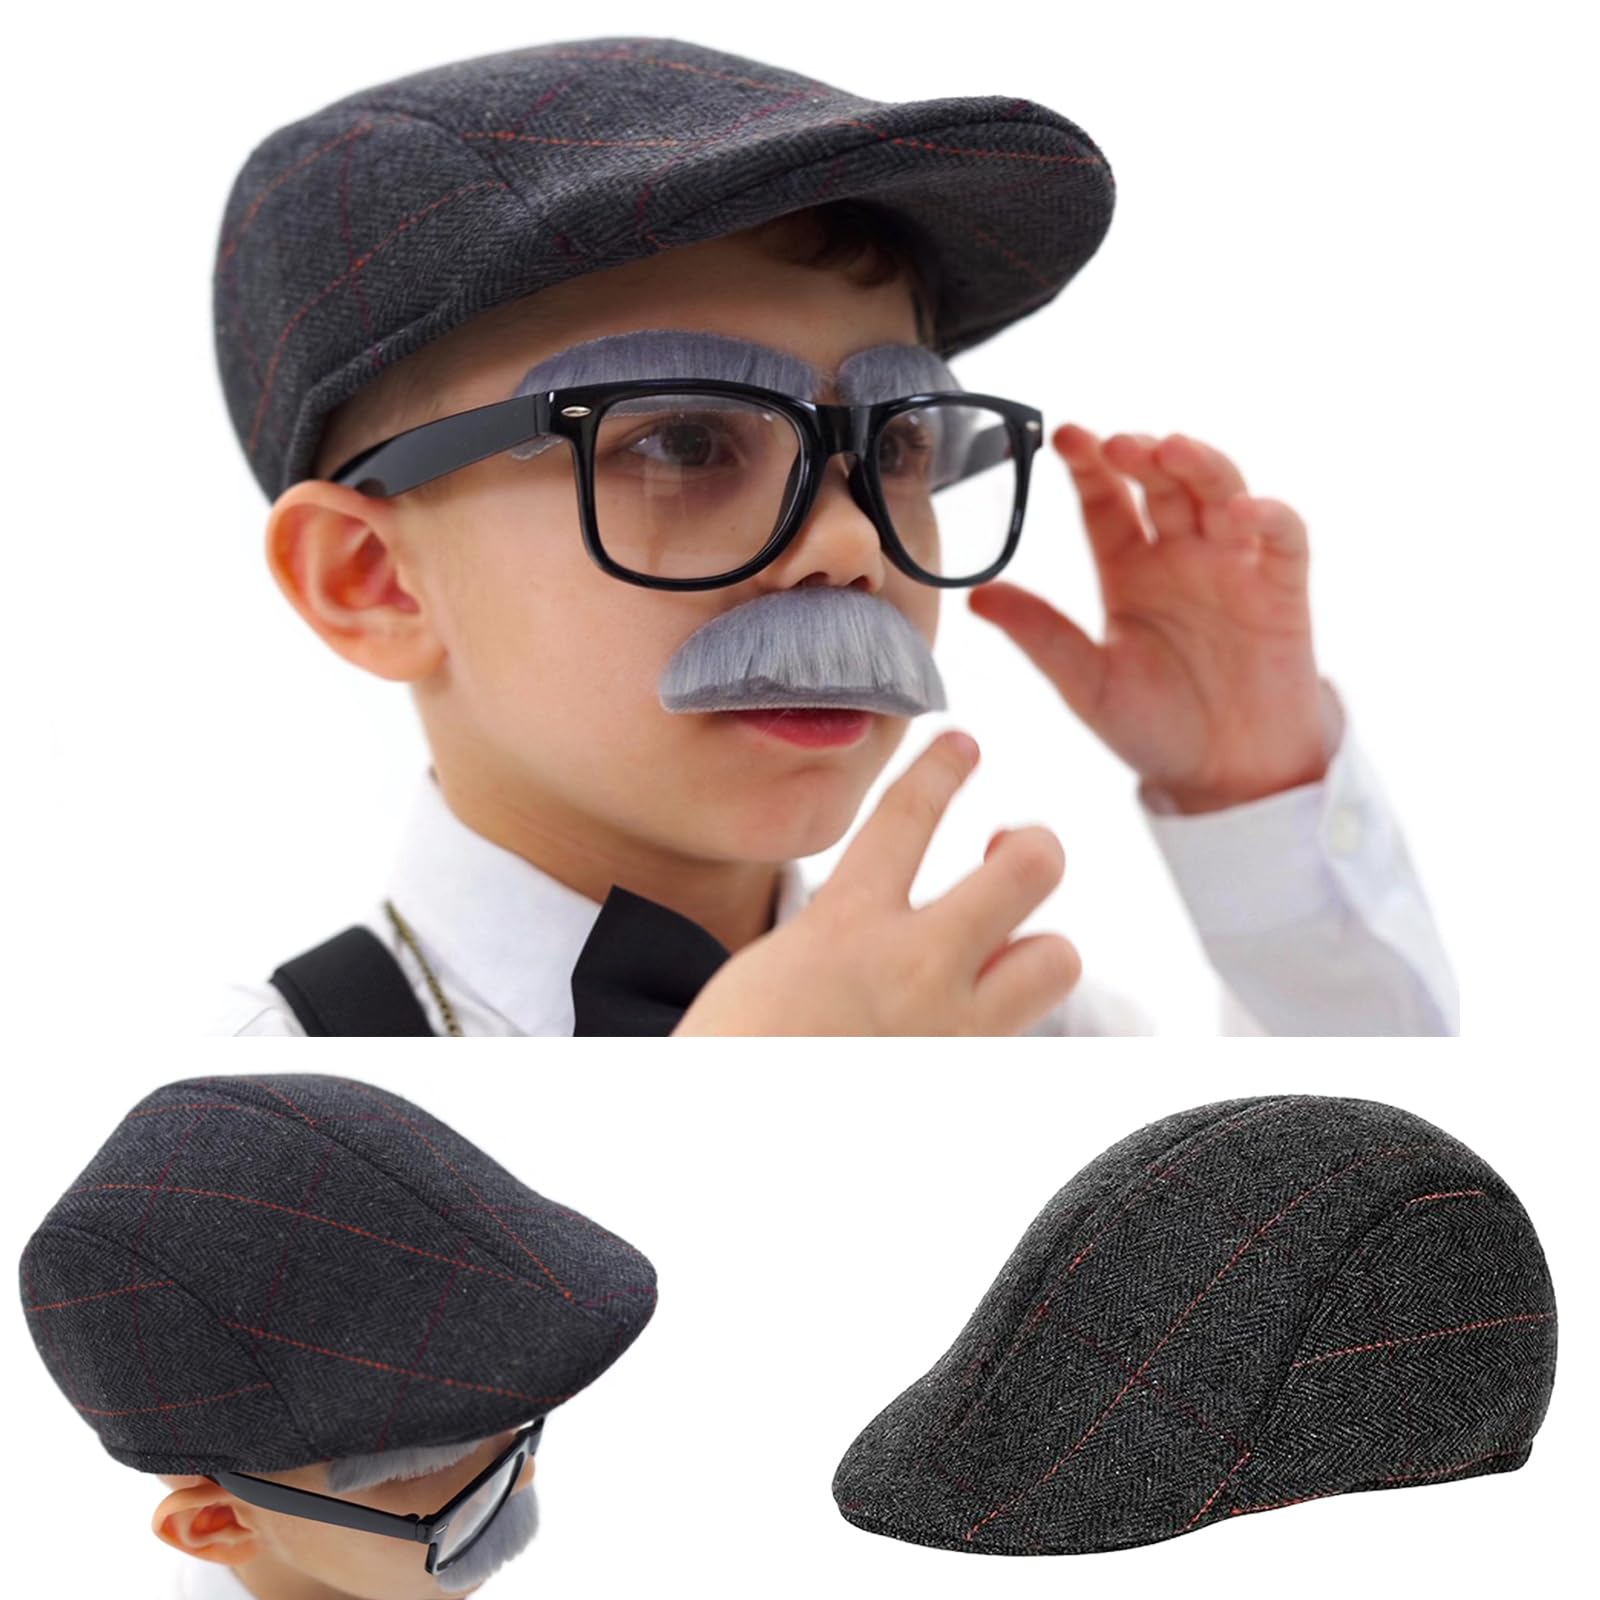 Aimeiar Kids 100 Days of School Costume for Boys - Halloween Old Man Costume Hat Glasses and Grandpa Vest Set for Child